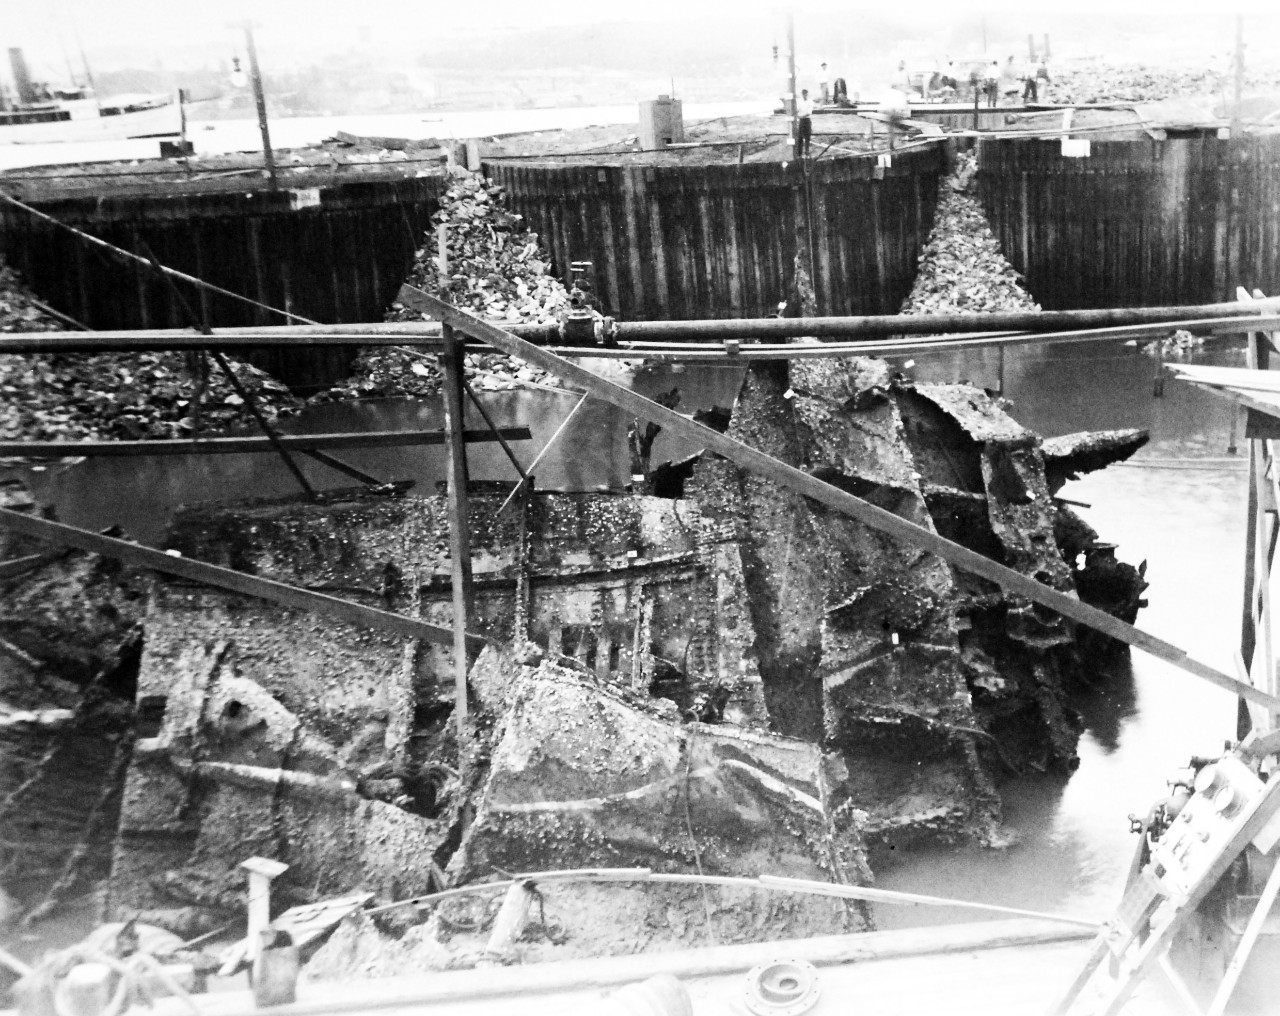 LC-Lot 8936-24:  USS Maine (1895-98).  Raising Maine’s wreck in Havana Harbor, Cuba, July 7, 1911.  Shown: bow and amidships wreckage.  Maine exploded on February 15, 1898, and was one of the causes for the United States to enter war with Spain, Spanish-American War, April-August 1898.  Transfer from the War Department, Washington.   (2015/10/2).